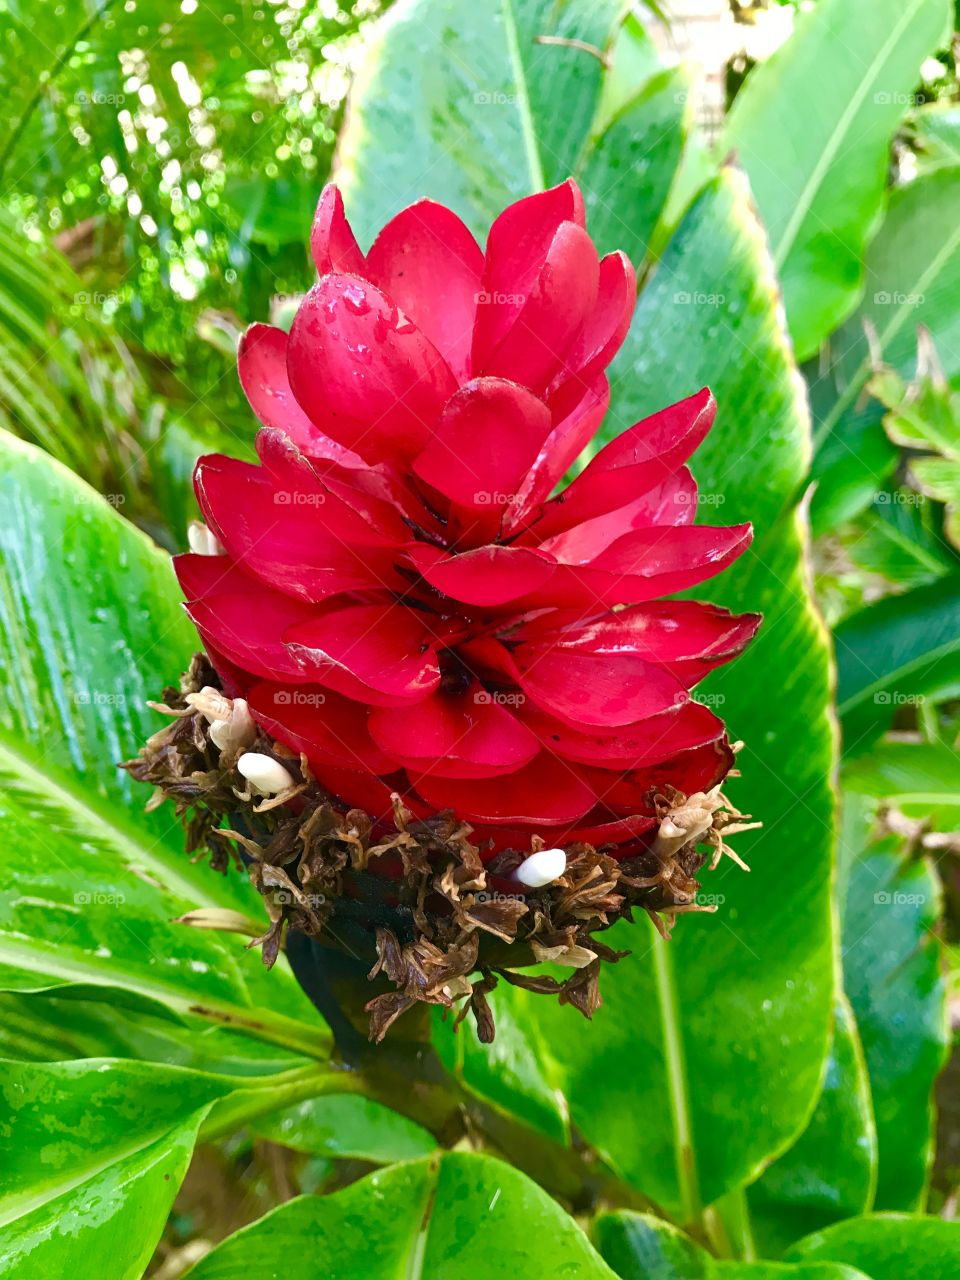 Flower that looks like a pinecone 